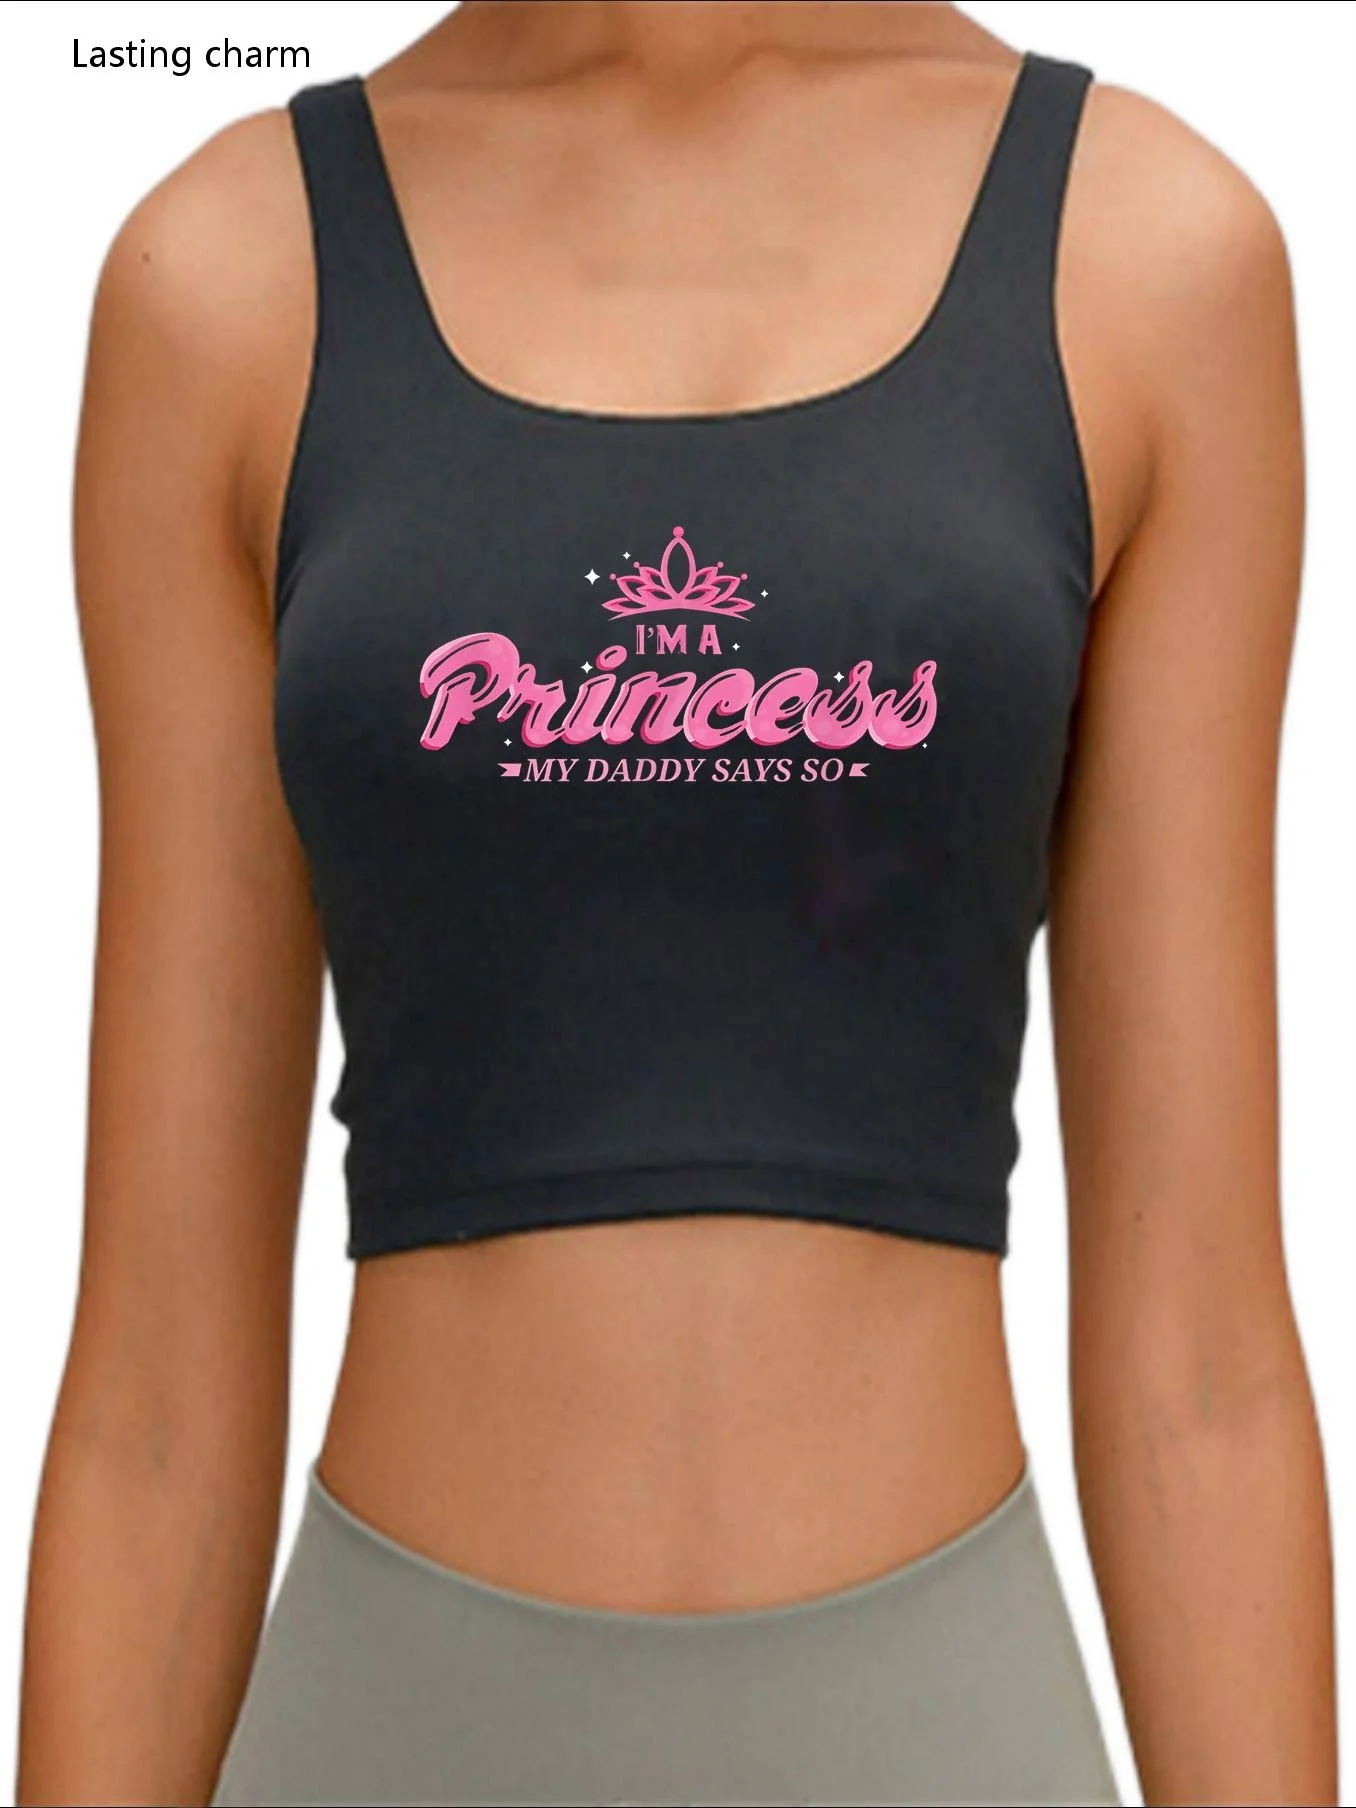 

I'm A Princess my daddy says so Inscription Print Crop Top Women's Yes Daddy Series Sexy Humor Print Sports yoga tank top